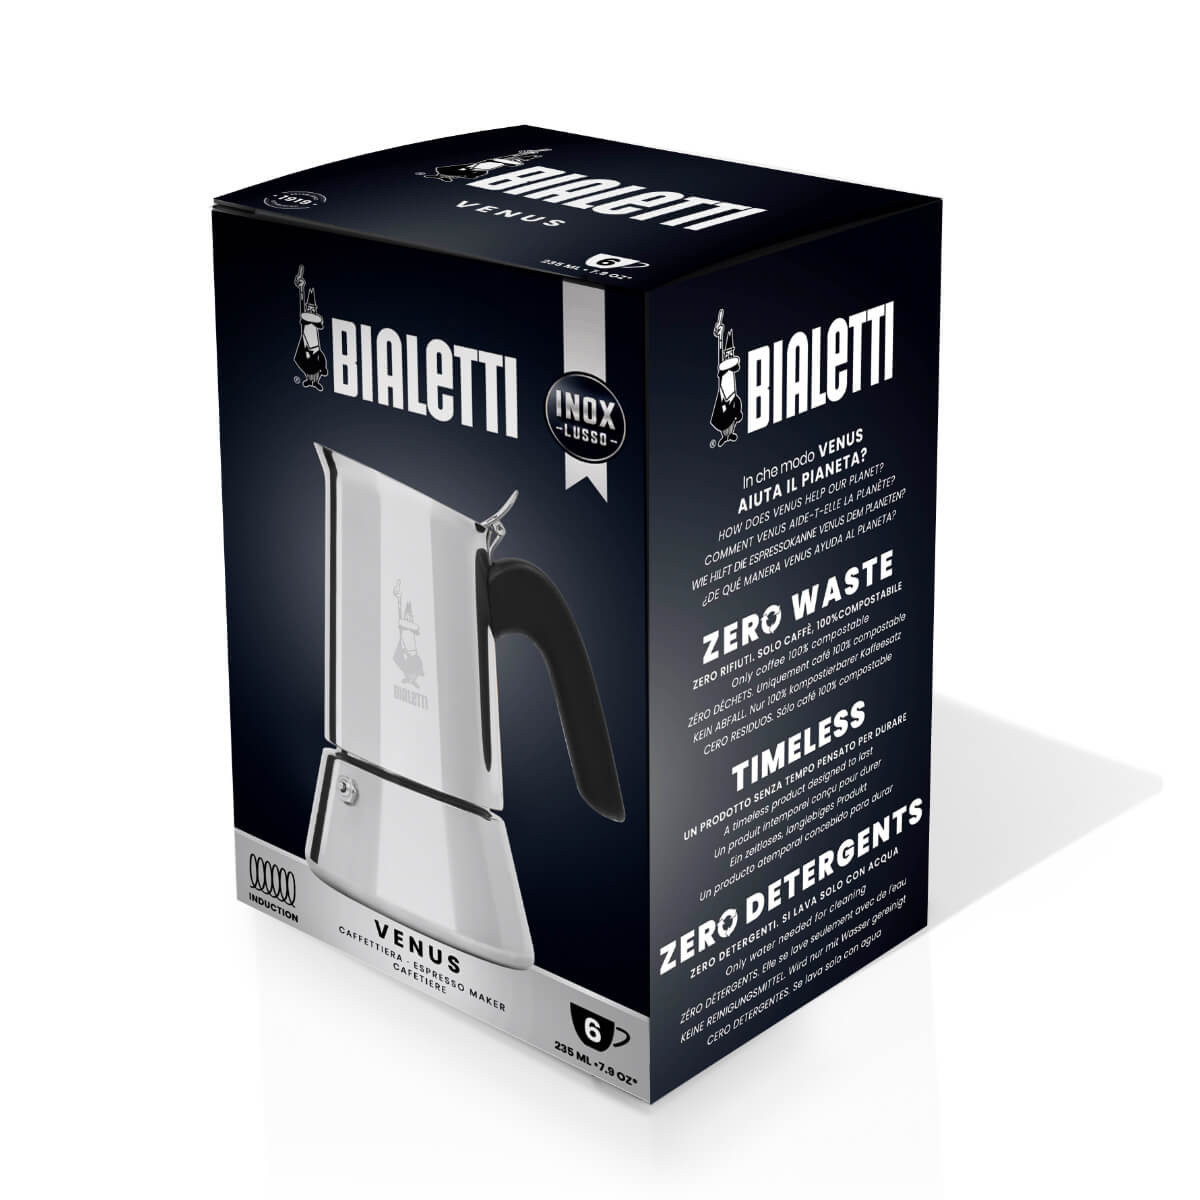 Brew Italia free UK delivery on orders over £30 Bialetti Venus packaging